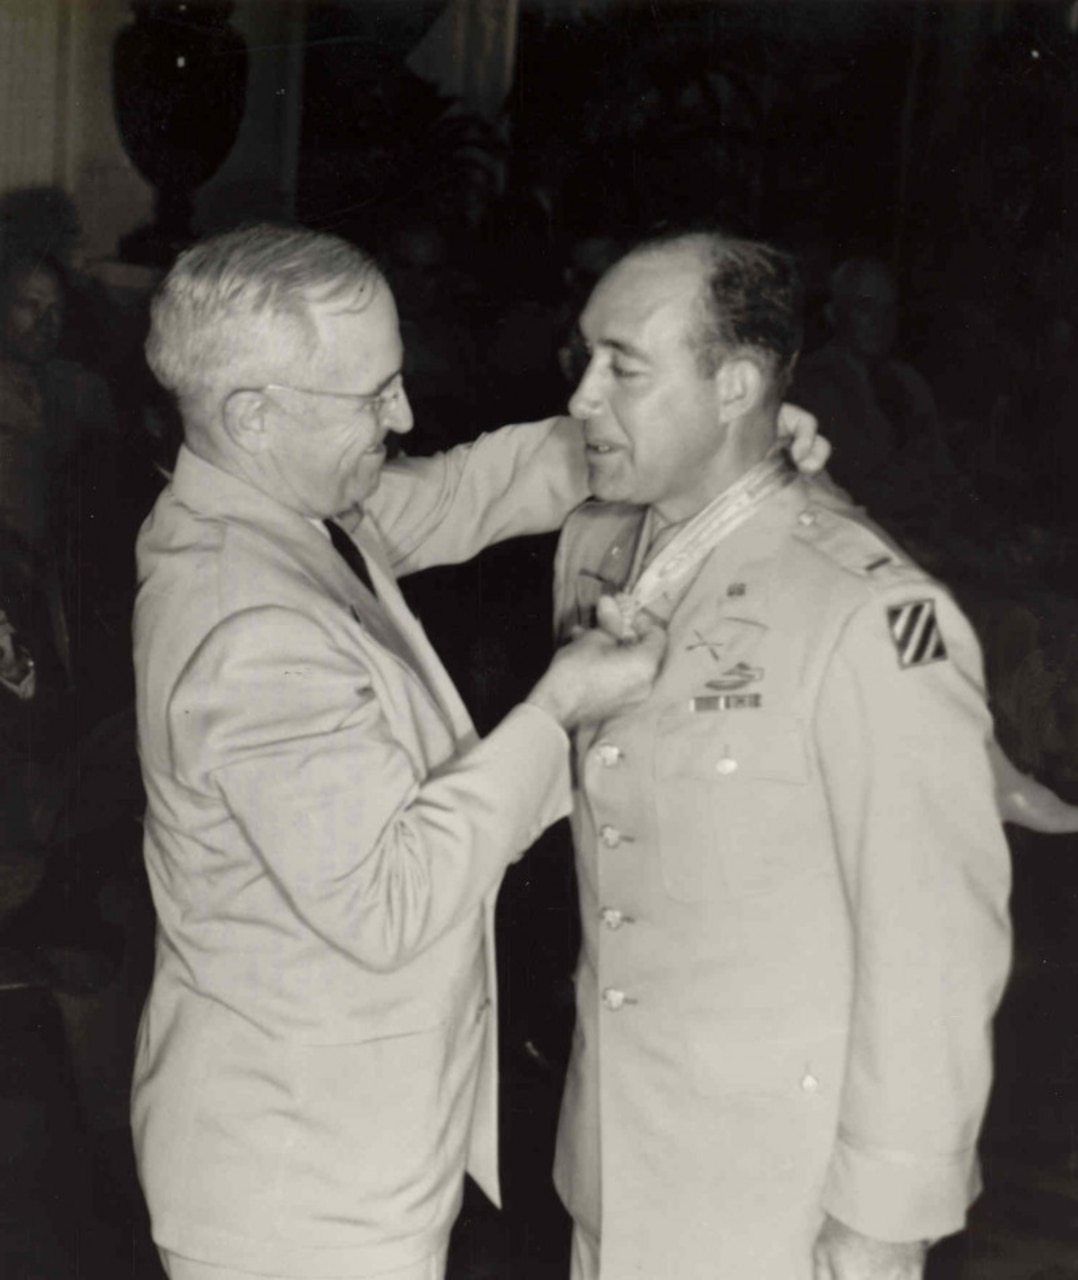 A man puts a medal around another man's neck.